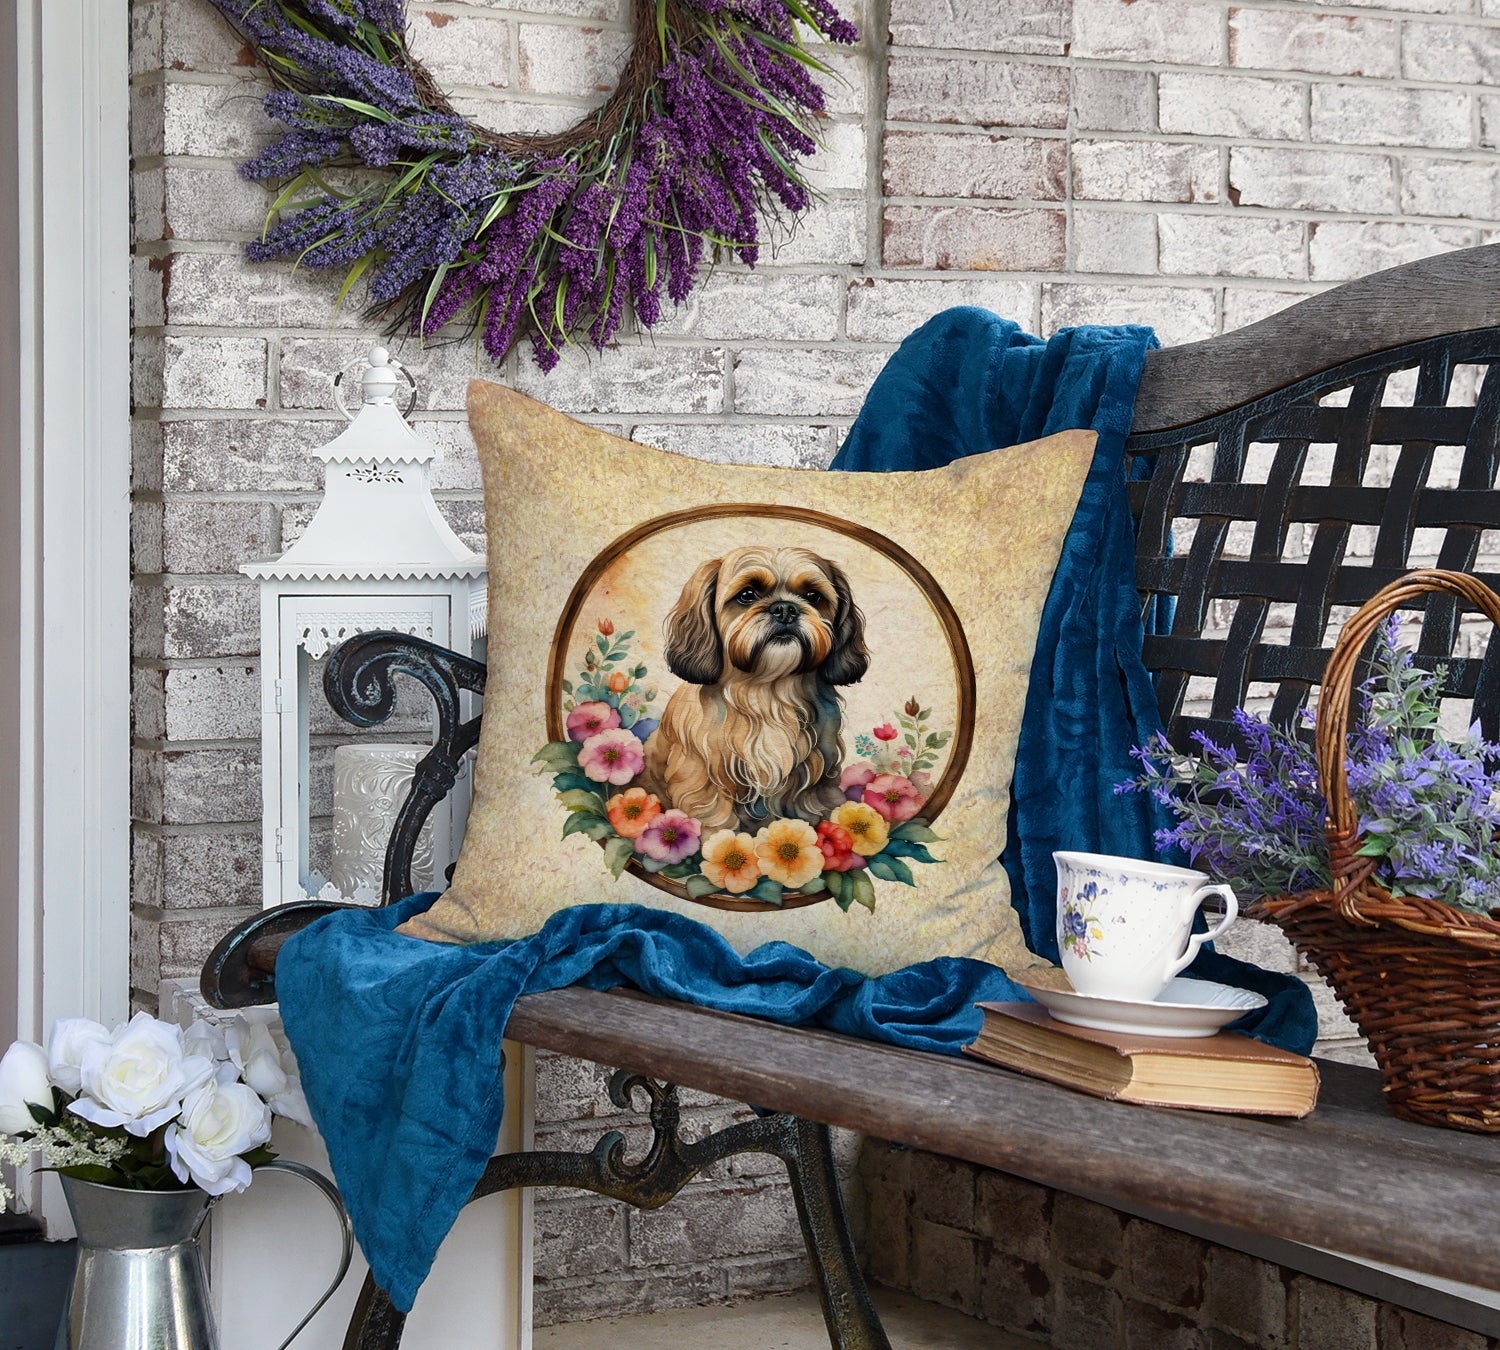 Lhasa Apso and Flowers Fabric Decorative Pillow